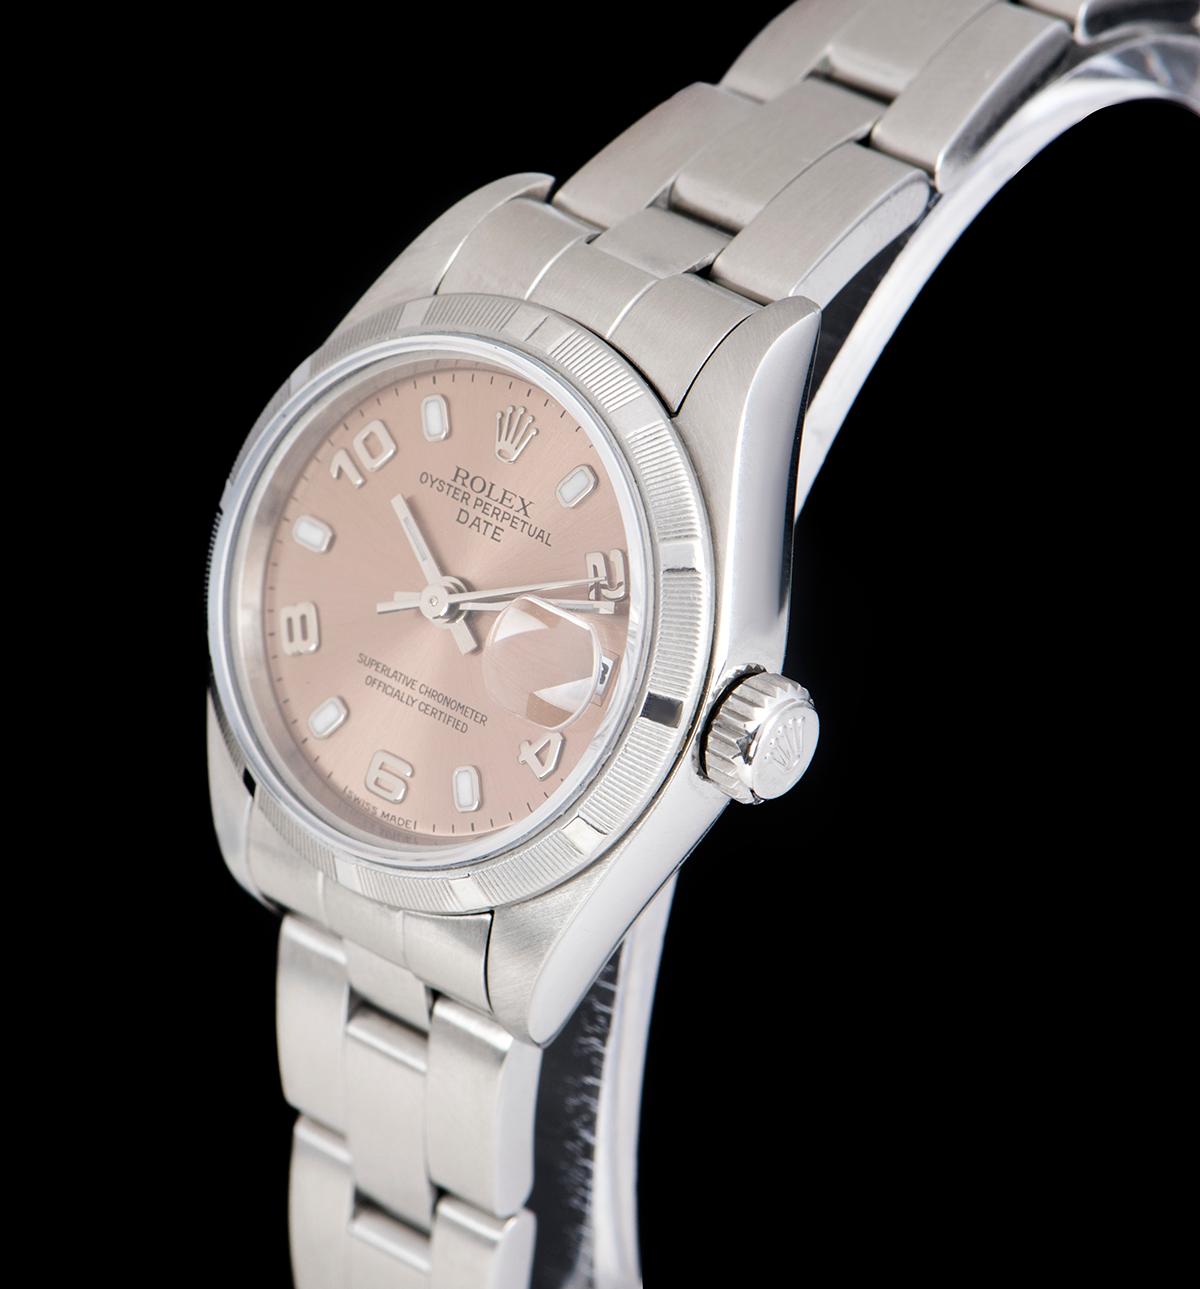 A Stainless Steel Oyster Perpetual Date Ladies Wristwatch, pink dial with applied hour markers and applied arabic numbers 2, 4, 6, 8 and 10, date at 3 0'clock, a fixed stainless steel engine turned bezel, a stainless steel oyster bracelet with a